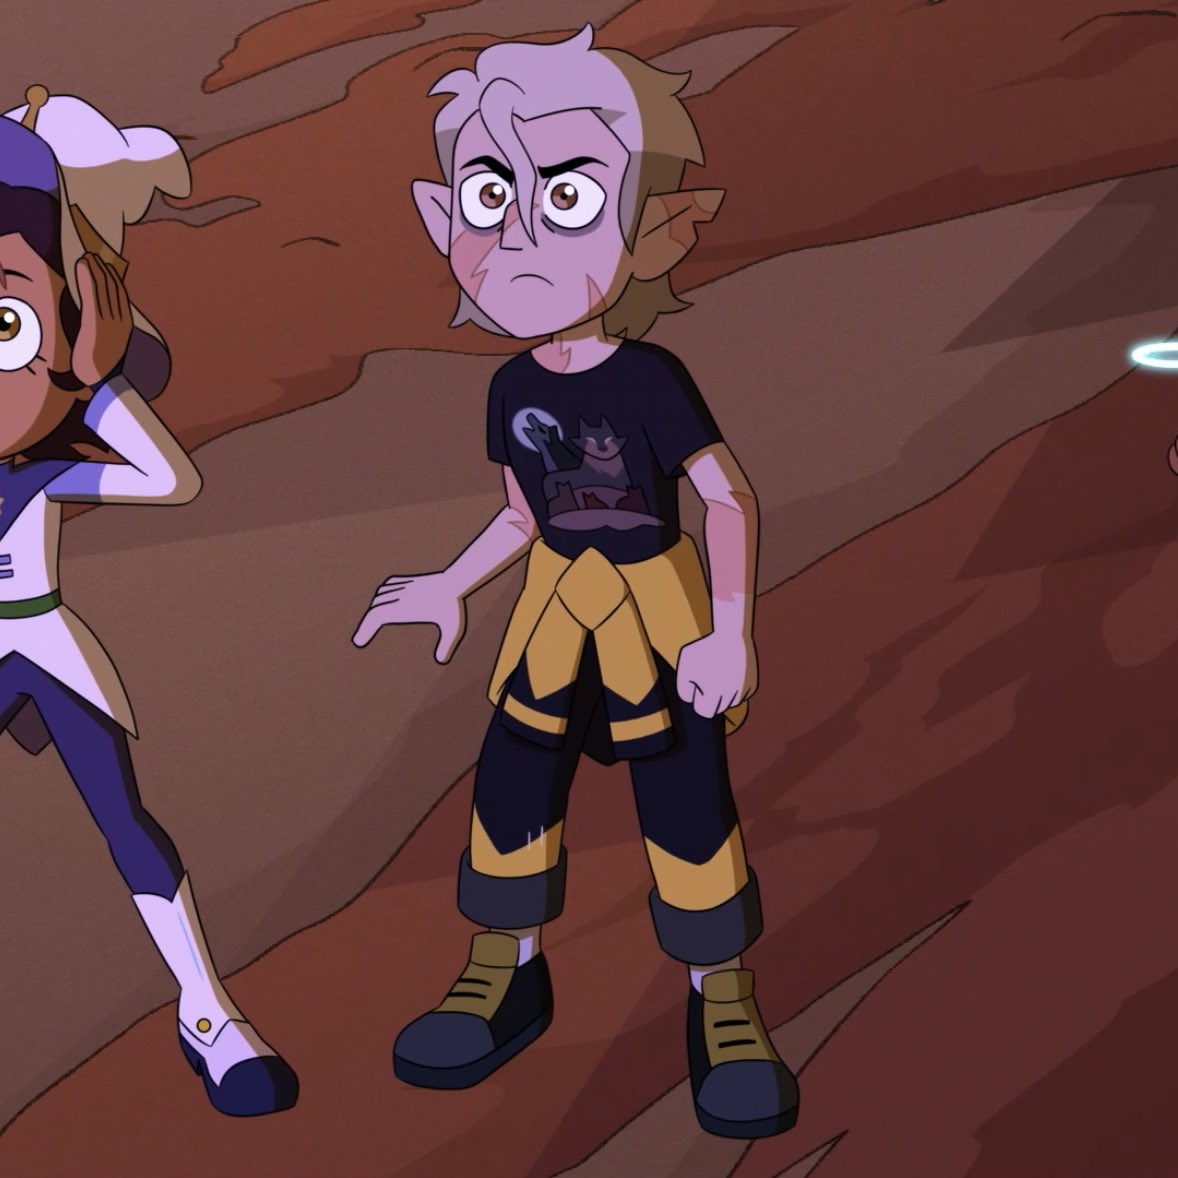 Day 704: Posting #TheOwlHouse pictures until #DisneyDoBetter gives us more content. #TOHSpoilers #SaveTheOwlHouse #TheOwlHouse #TheOwlHouseSeason3 #TOH #SupportTheOwlHouse #ThankYouTheOwlHouse #TOHSpoilers #WeLoveDana #TheOwlHouseSequelSeries #ThankYouDana